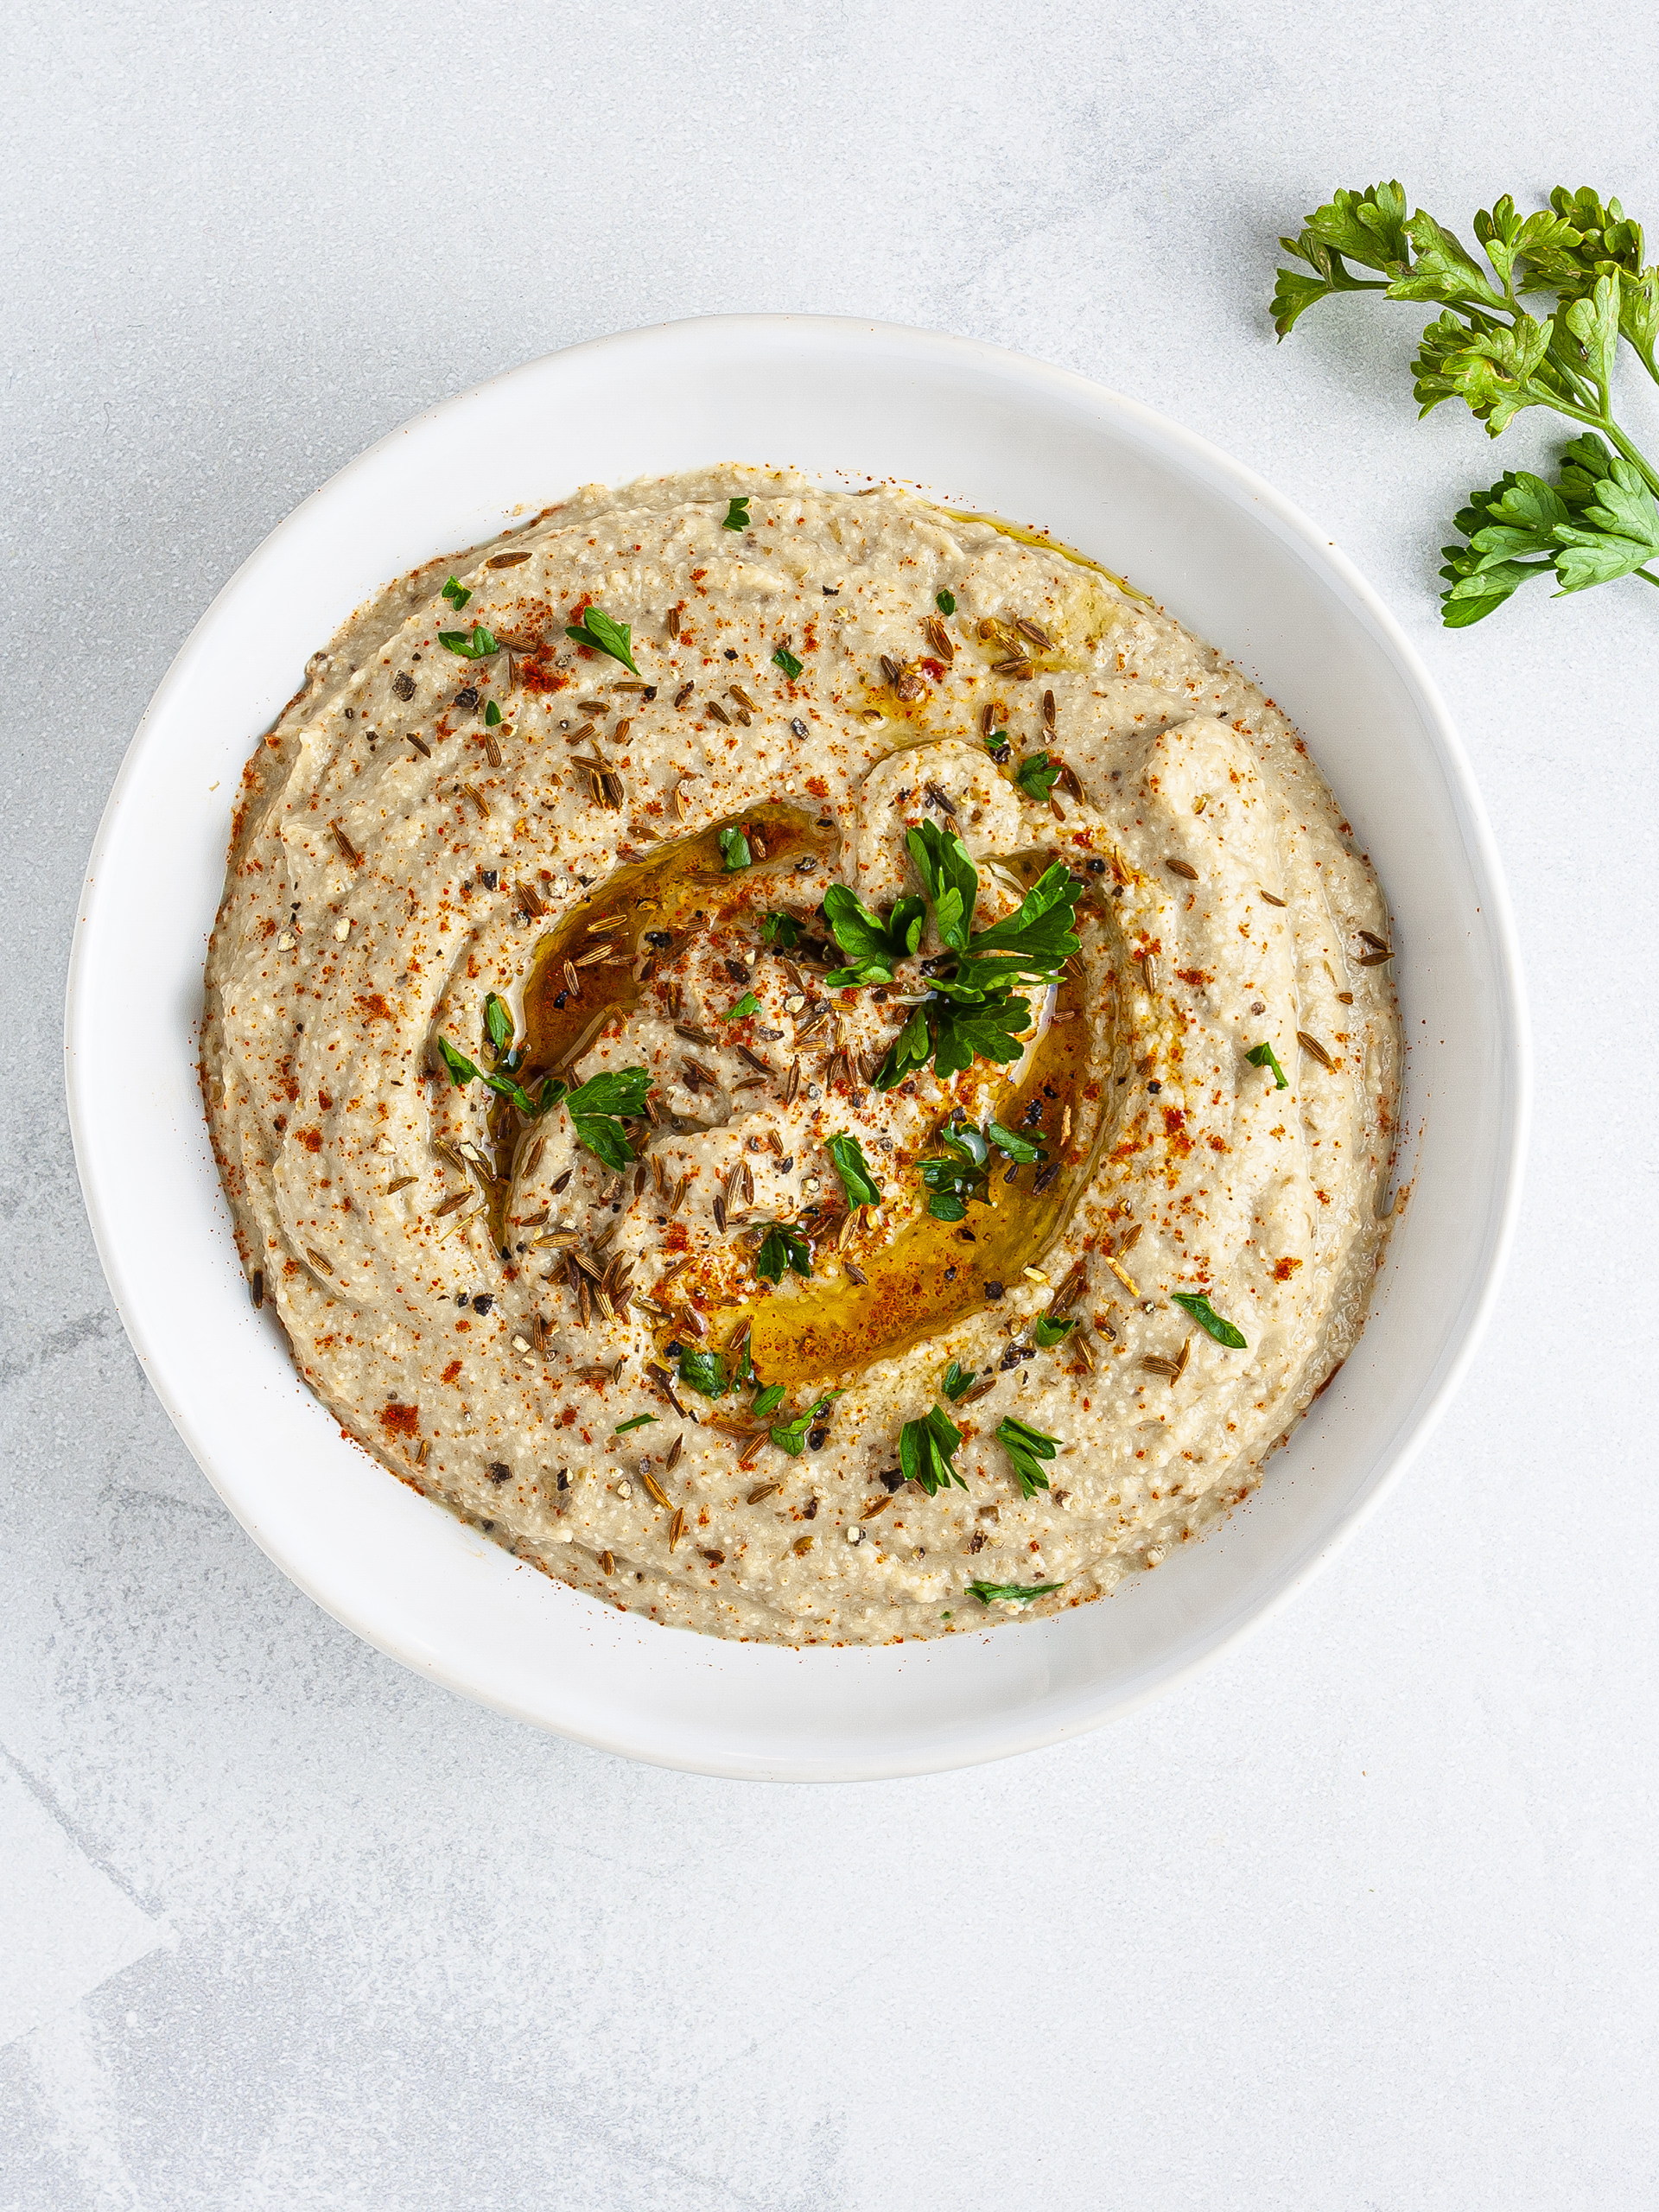 Baba ganoush topped with paprika and cumin seeds